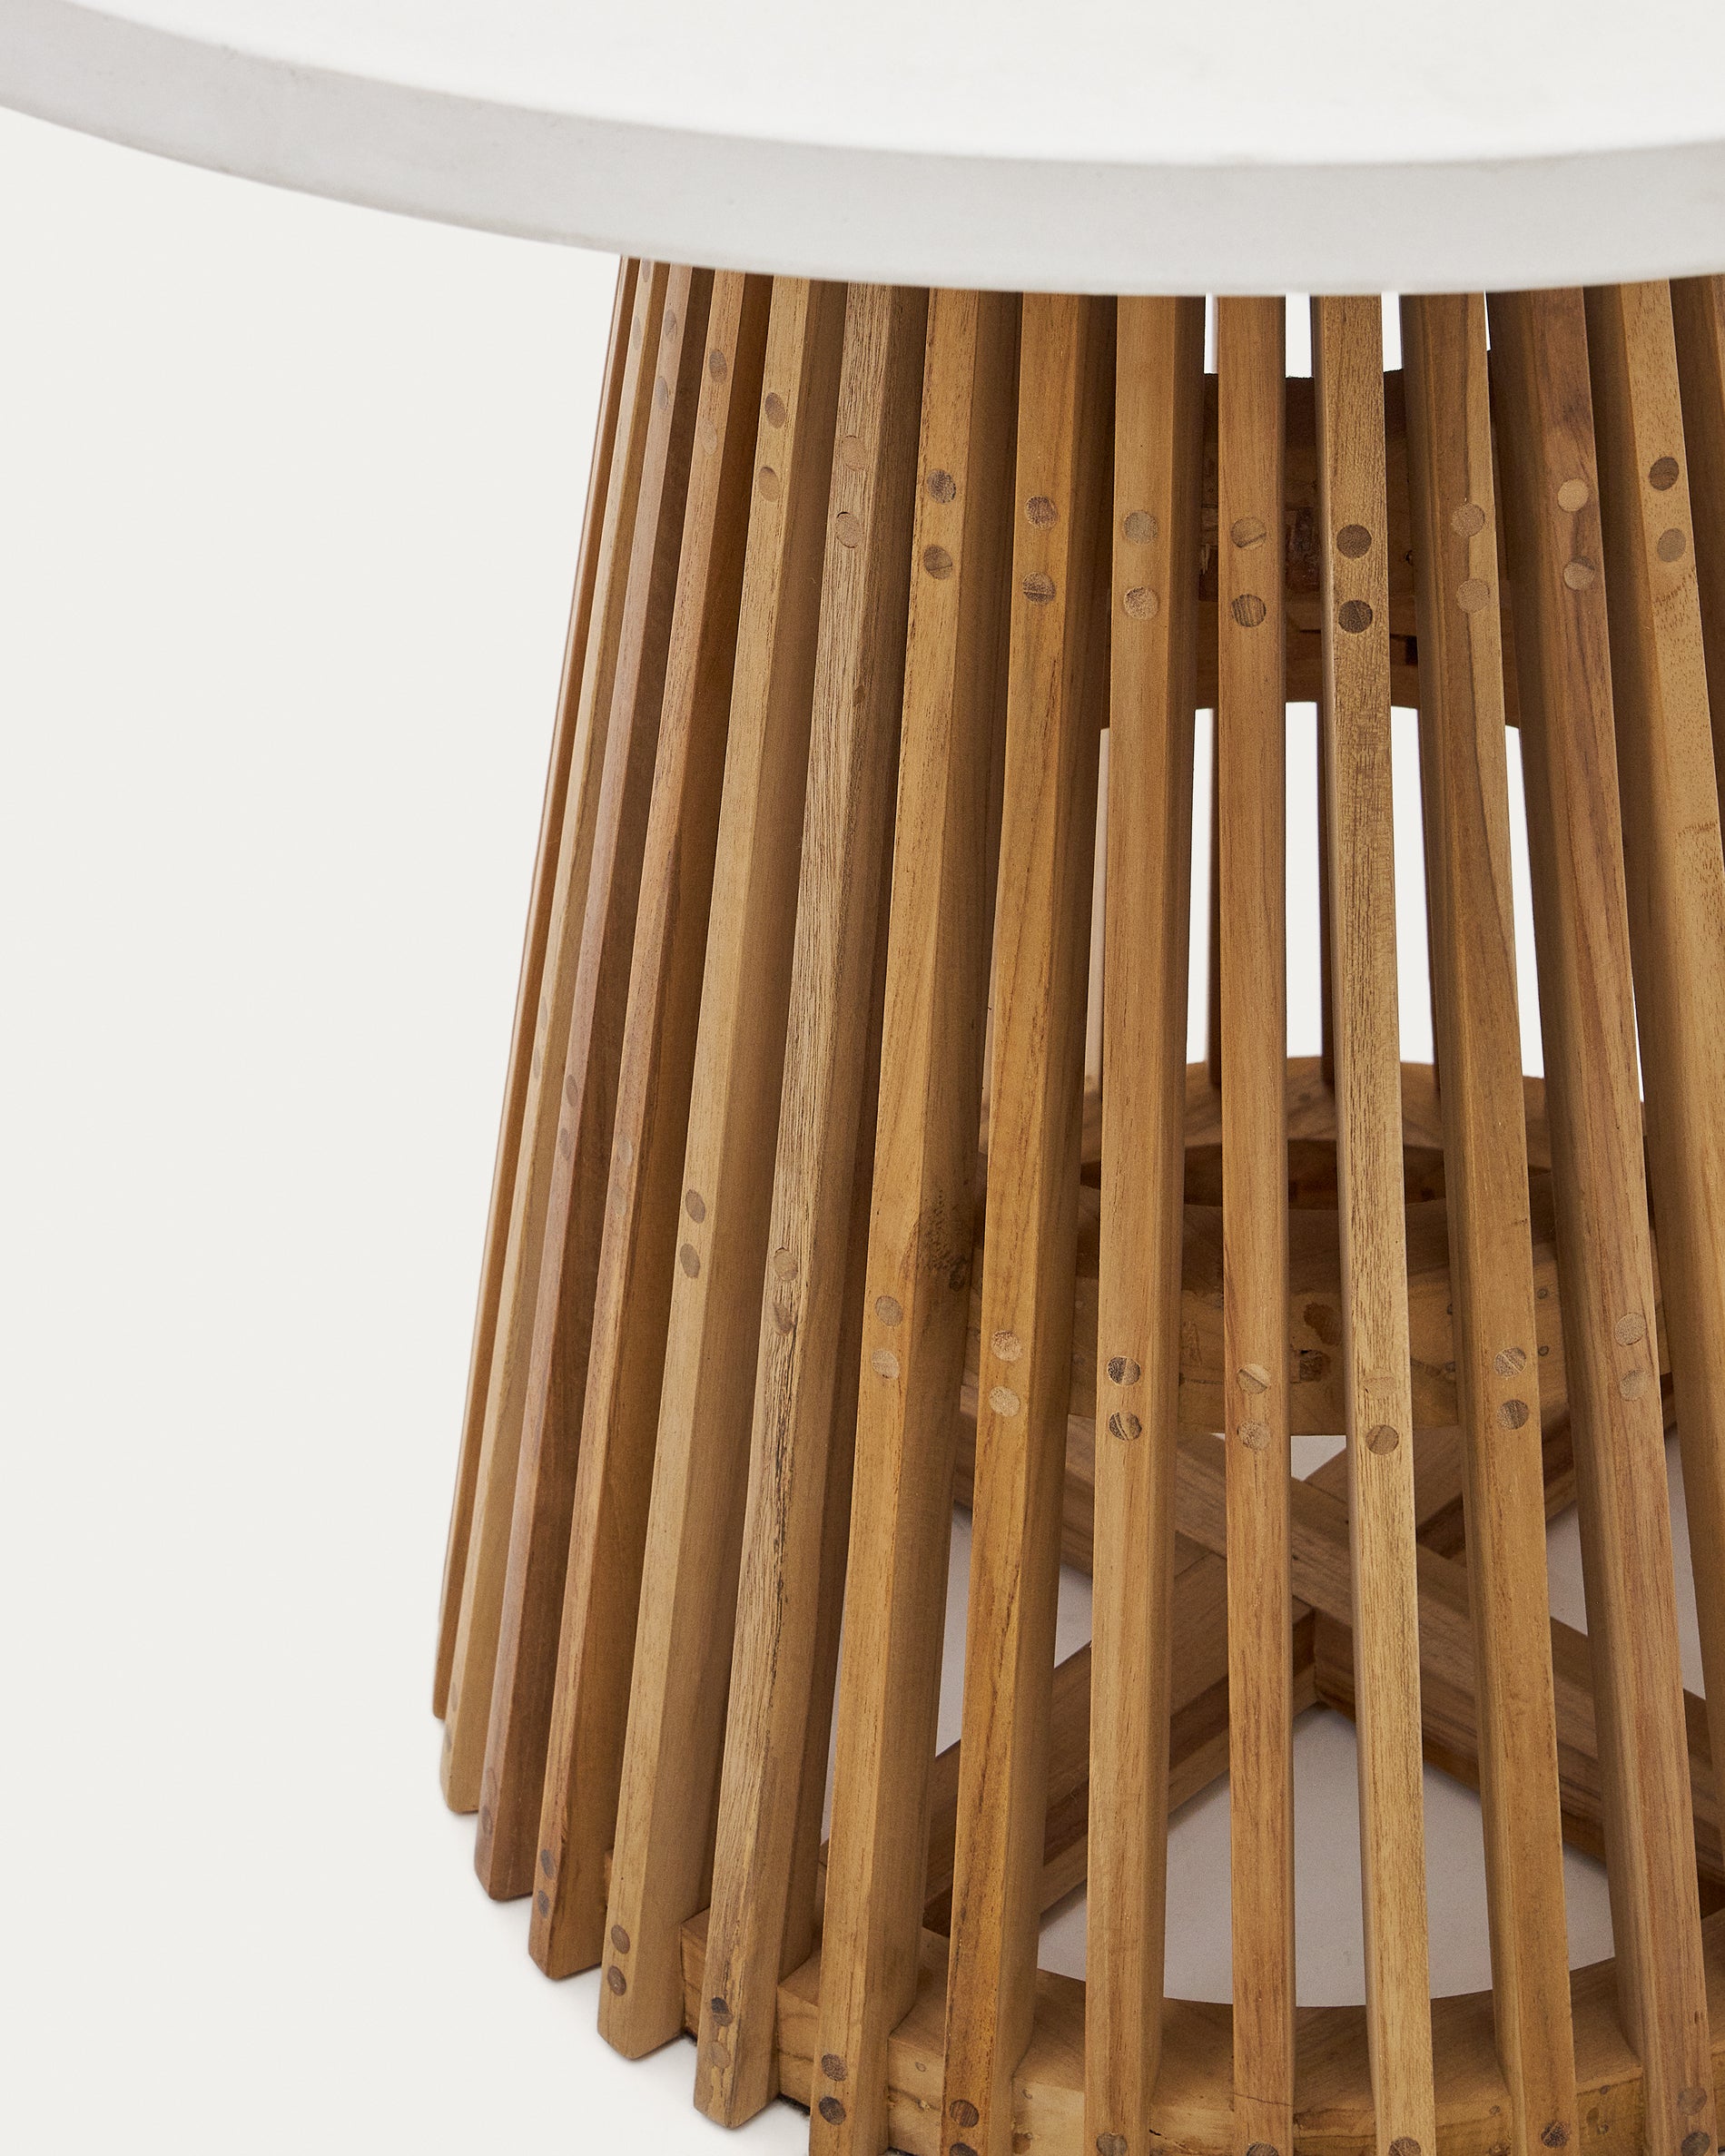 Alcaufar round outdoor table made of solid teak and white cement Ø 90 cm